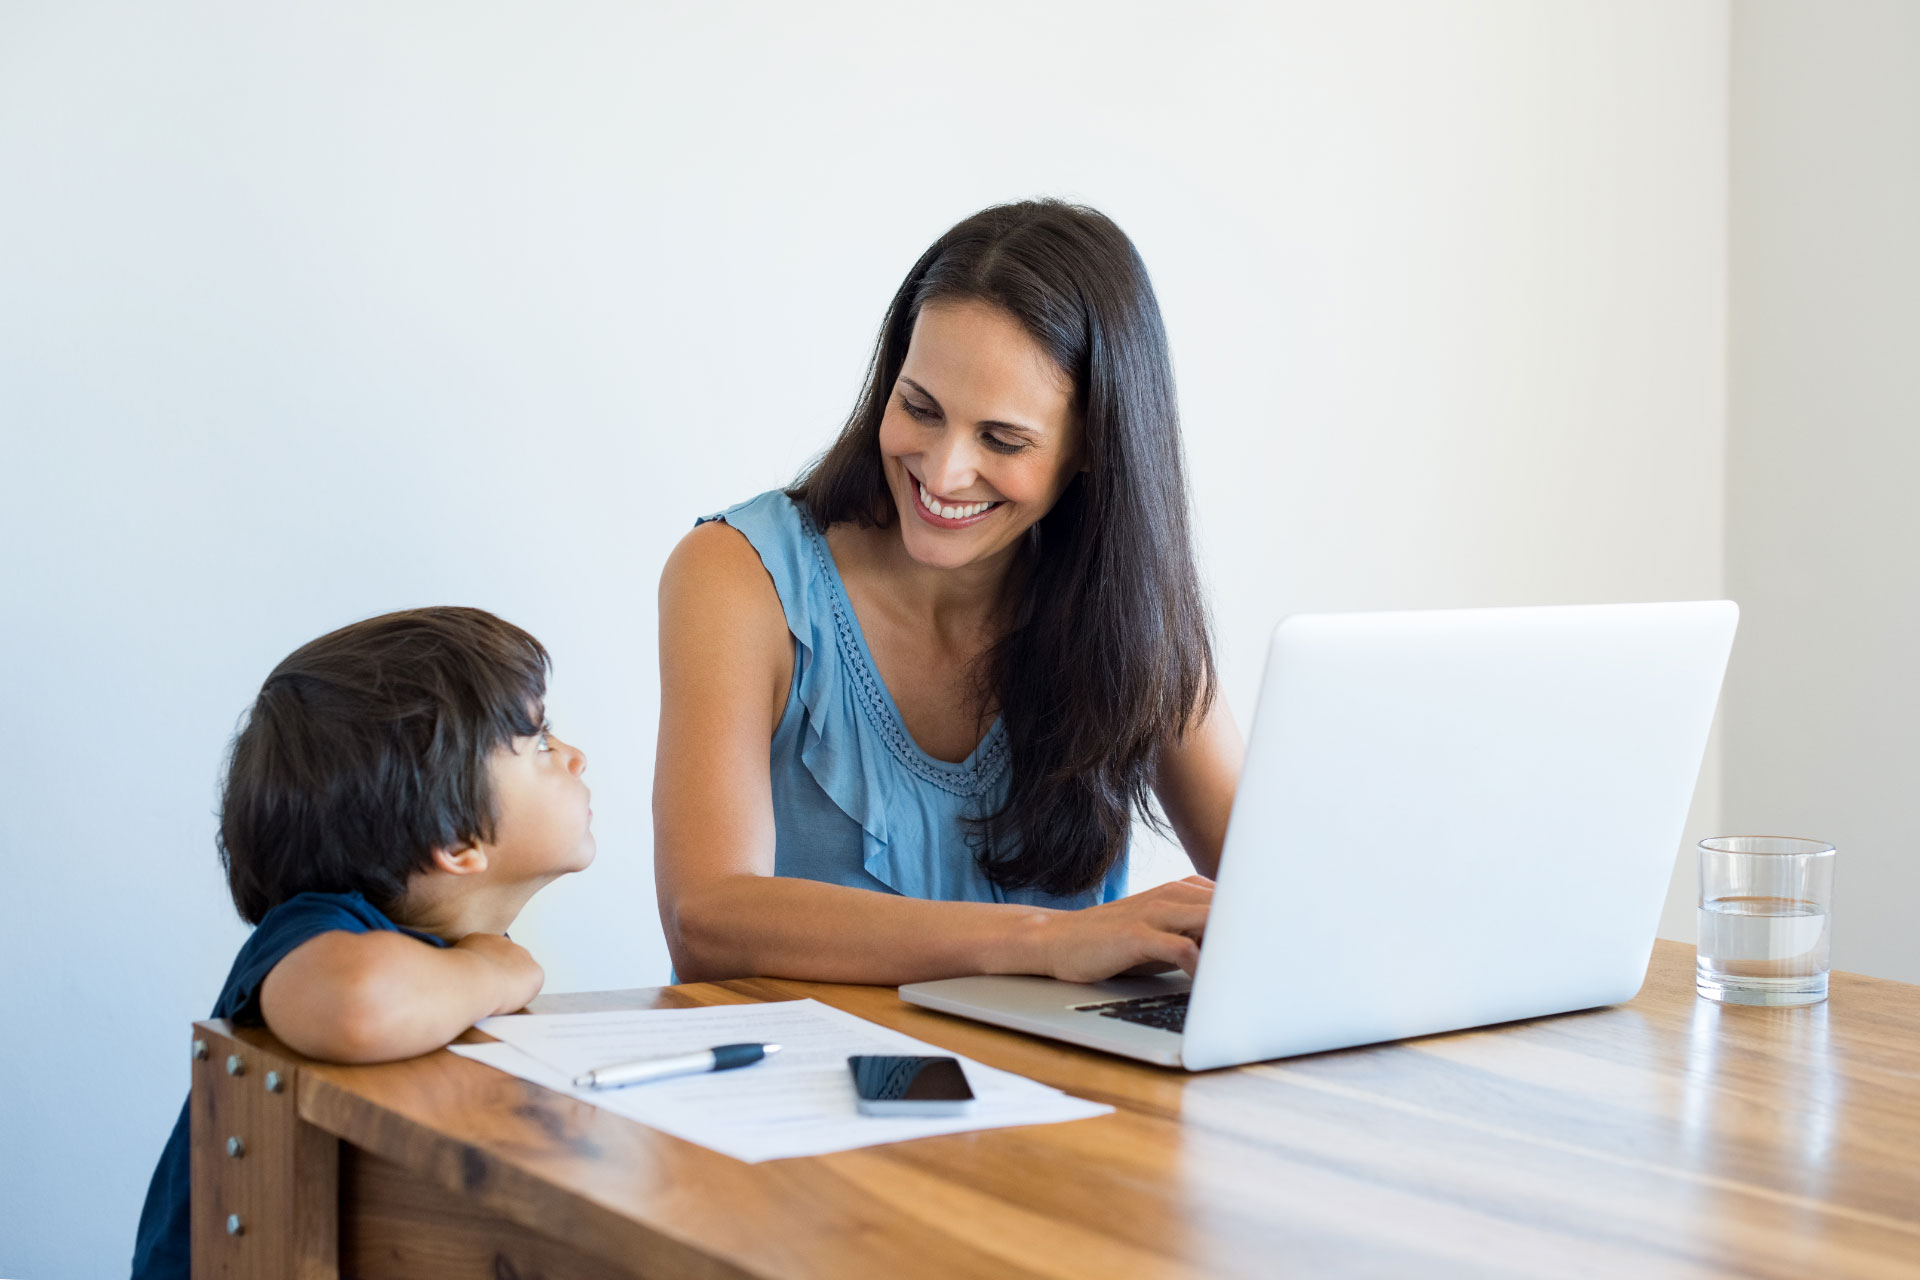 Smiling and confident mother is working at home with her laptop on a dining table, while speaking to her son who's standing beside her and looking up at her.